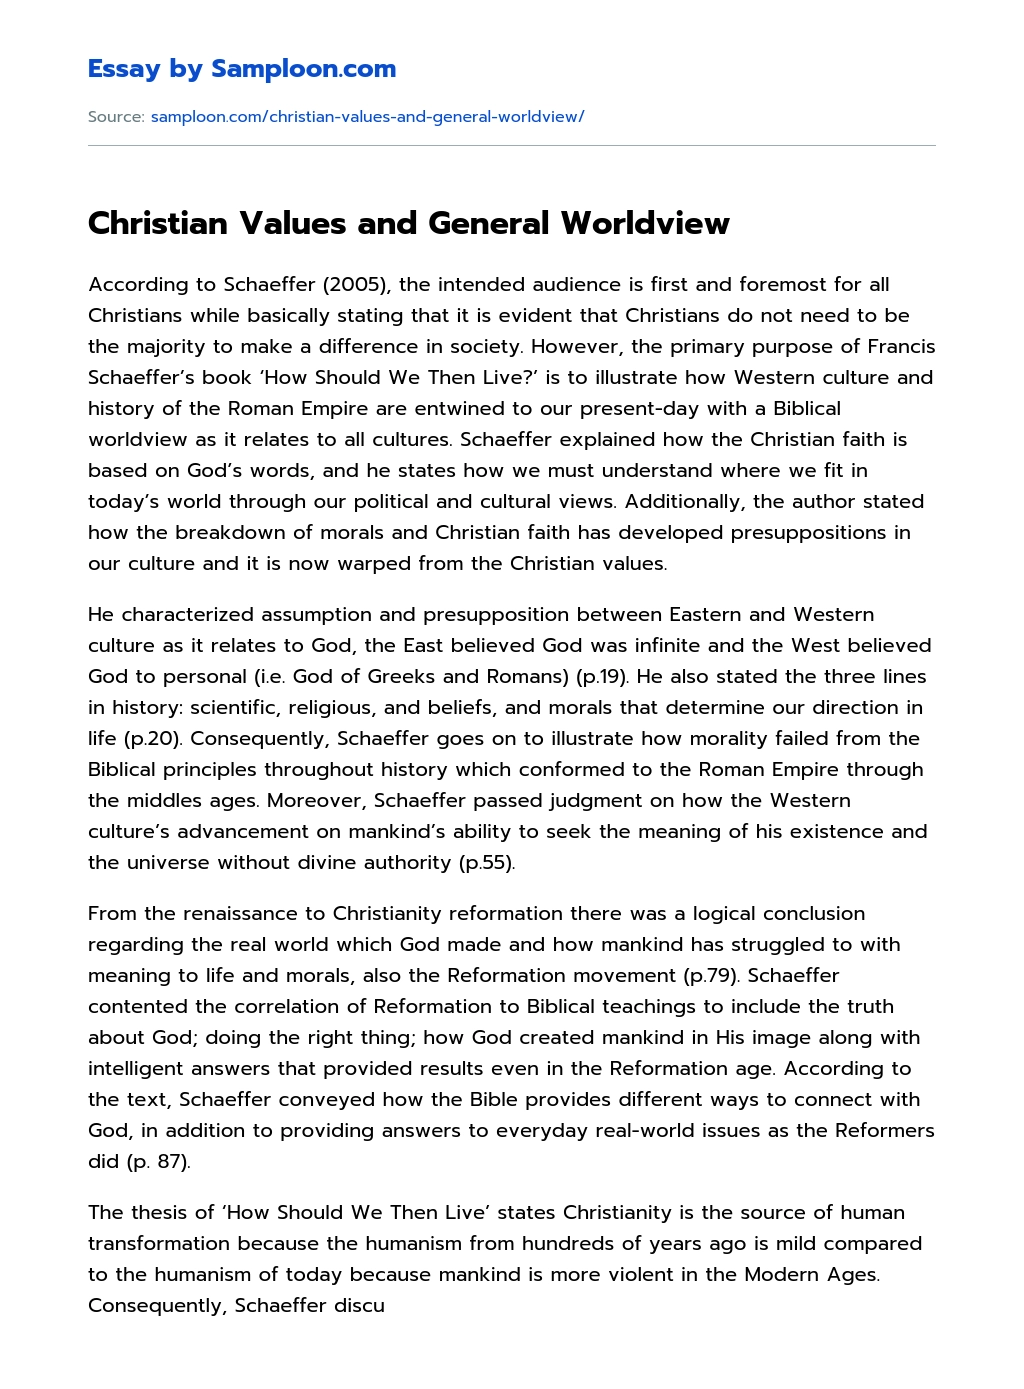 Christian Values and General Worldview essay